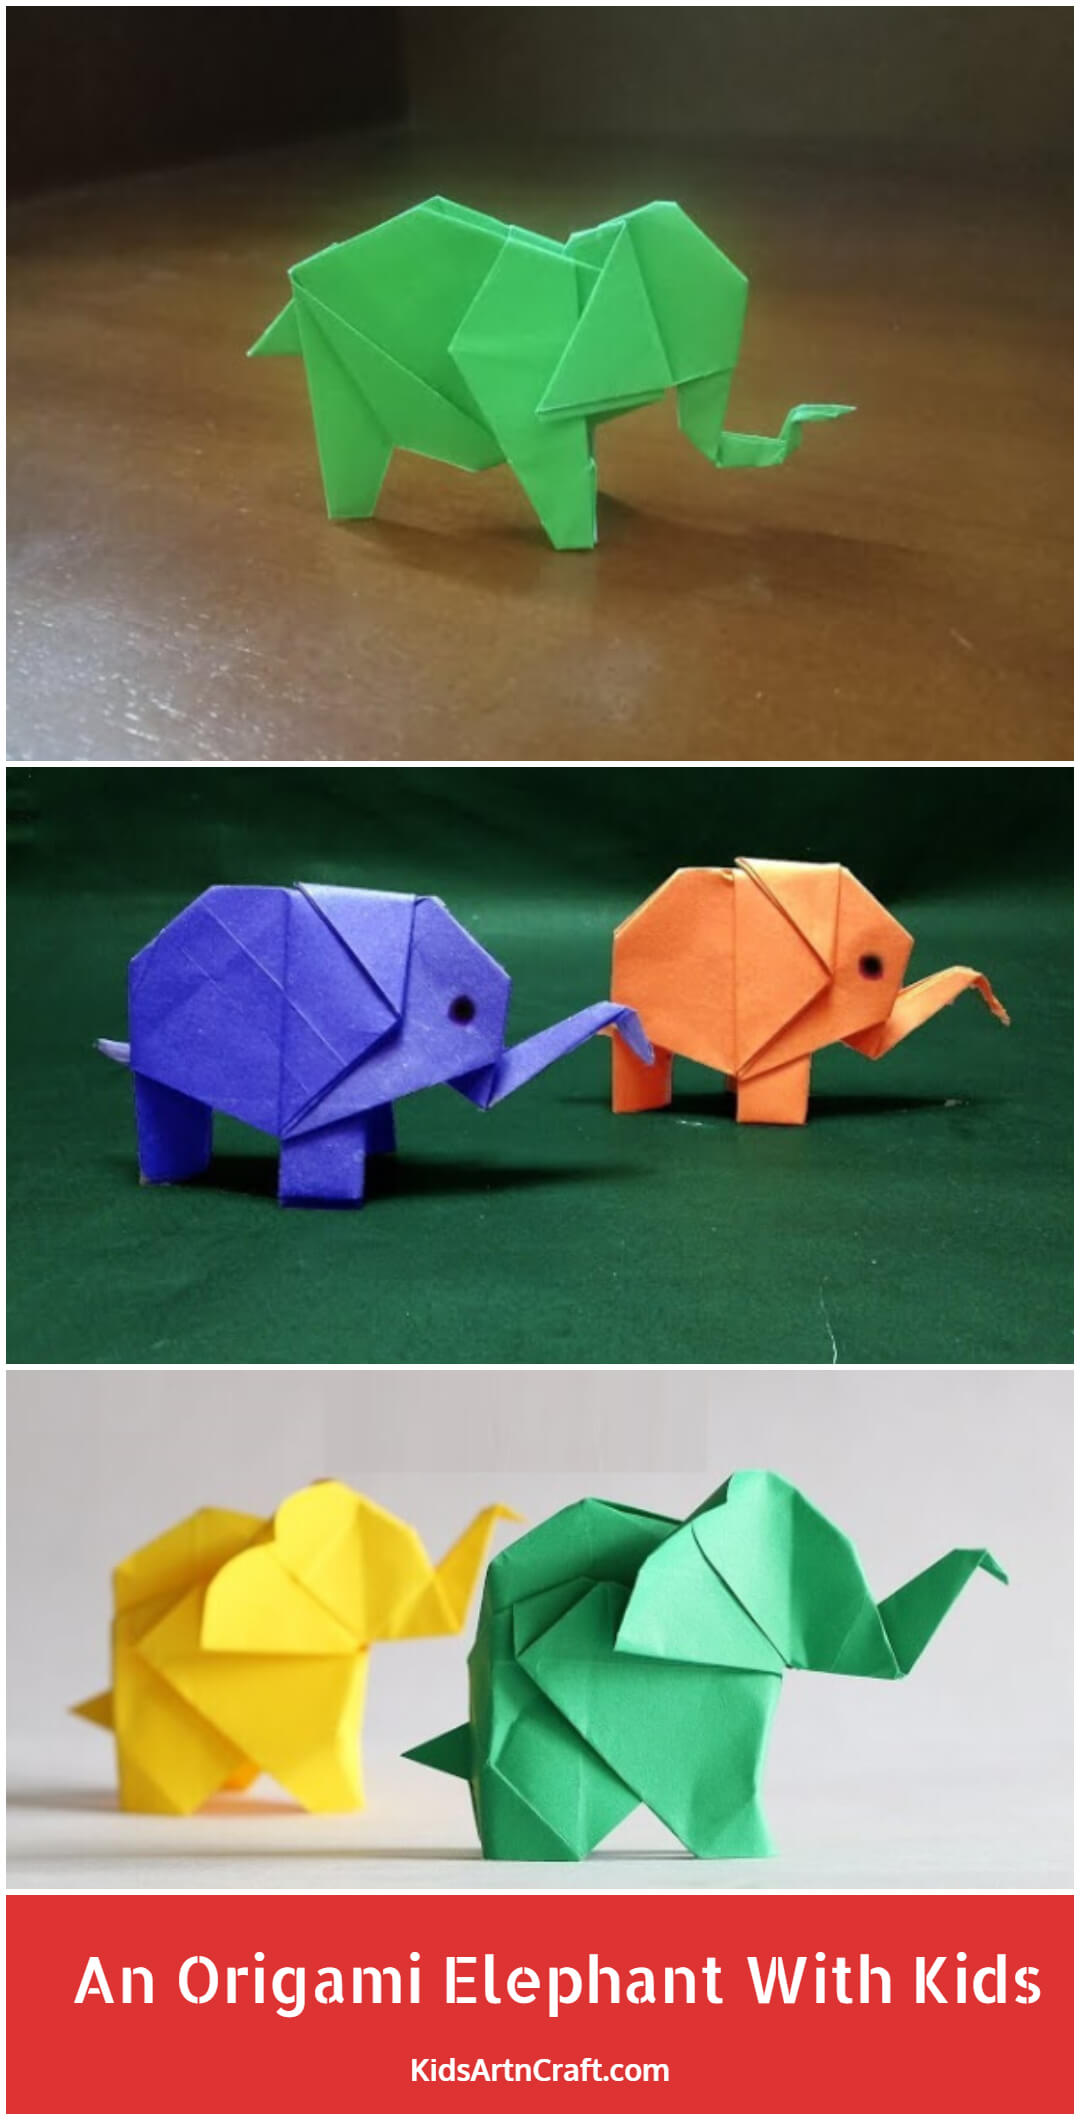 How To Make An Origami Elephant With Kids